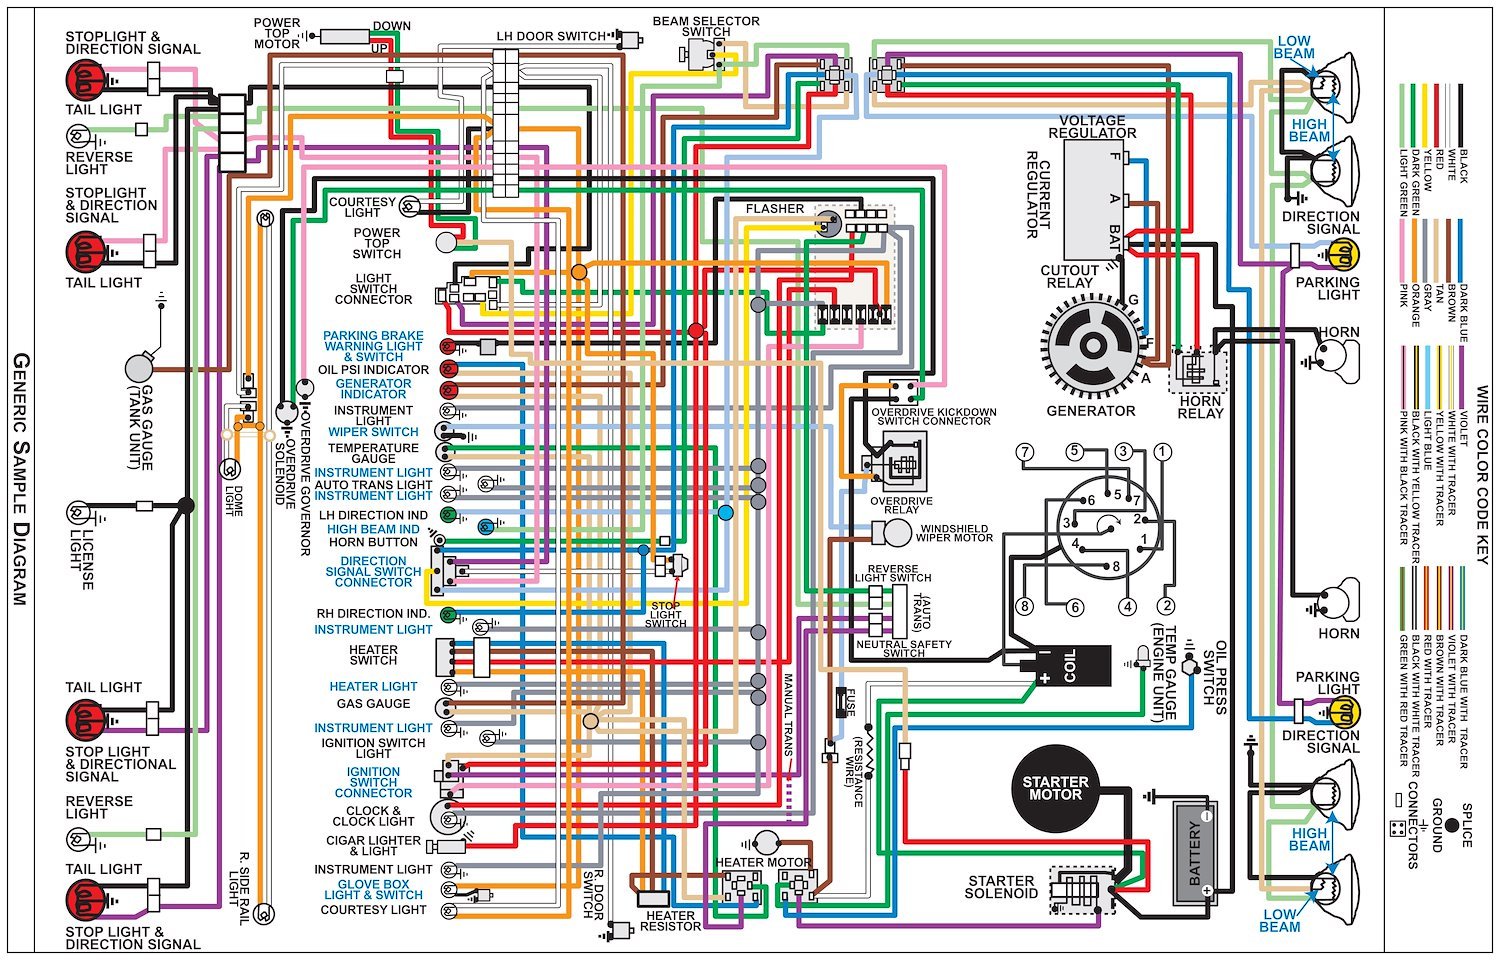 Wiring Diagram for 1969 Chevy Belair, Biscayne, Impala,